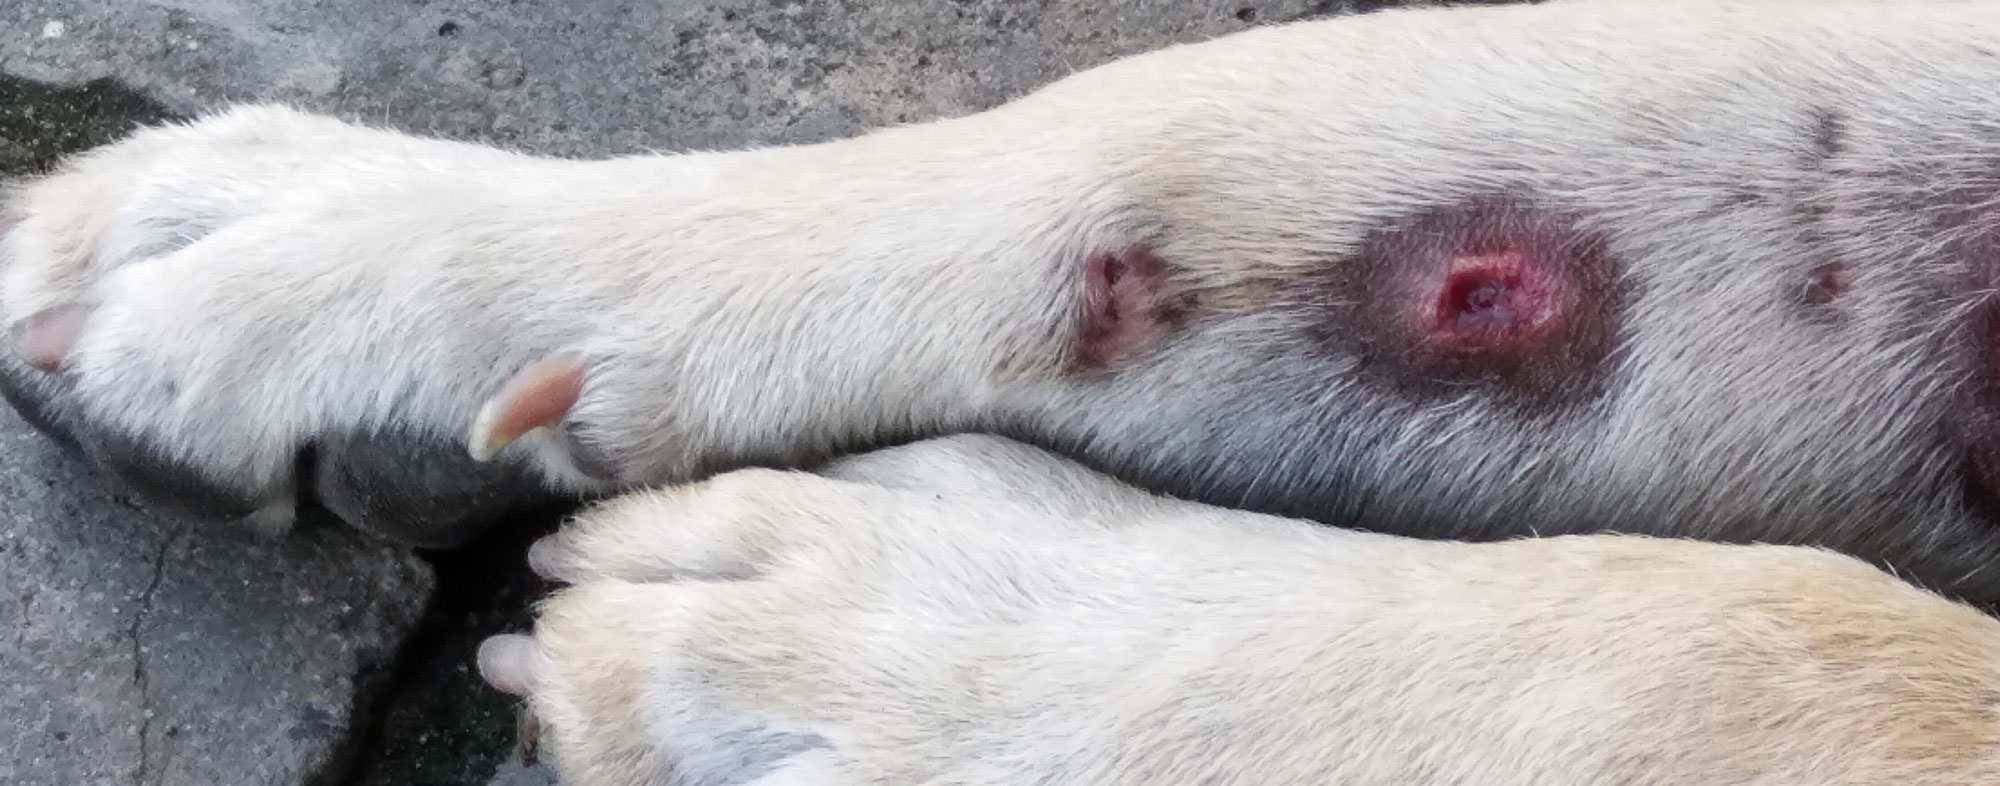 A dog with three hot spots on its paw, going to the vet for a treatment